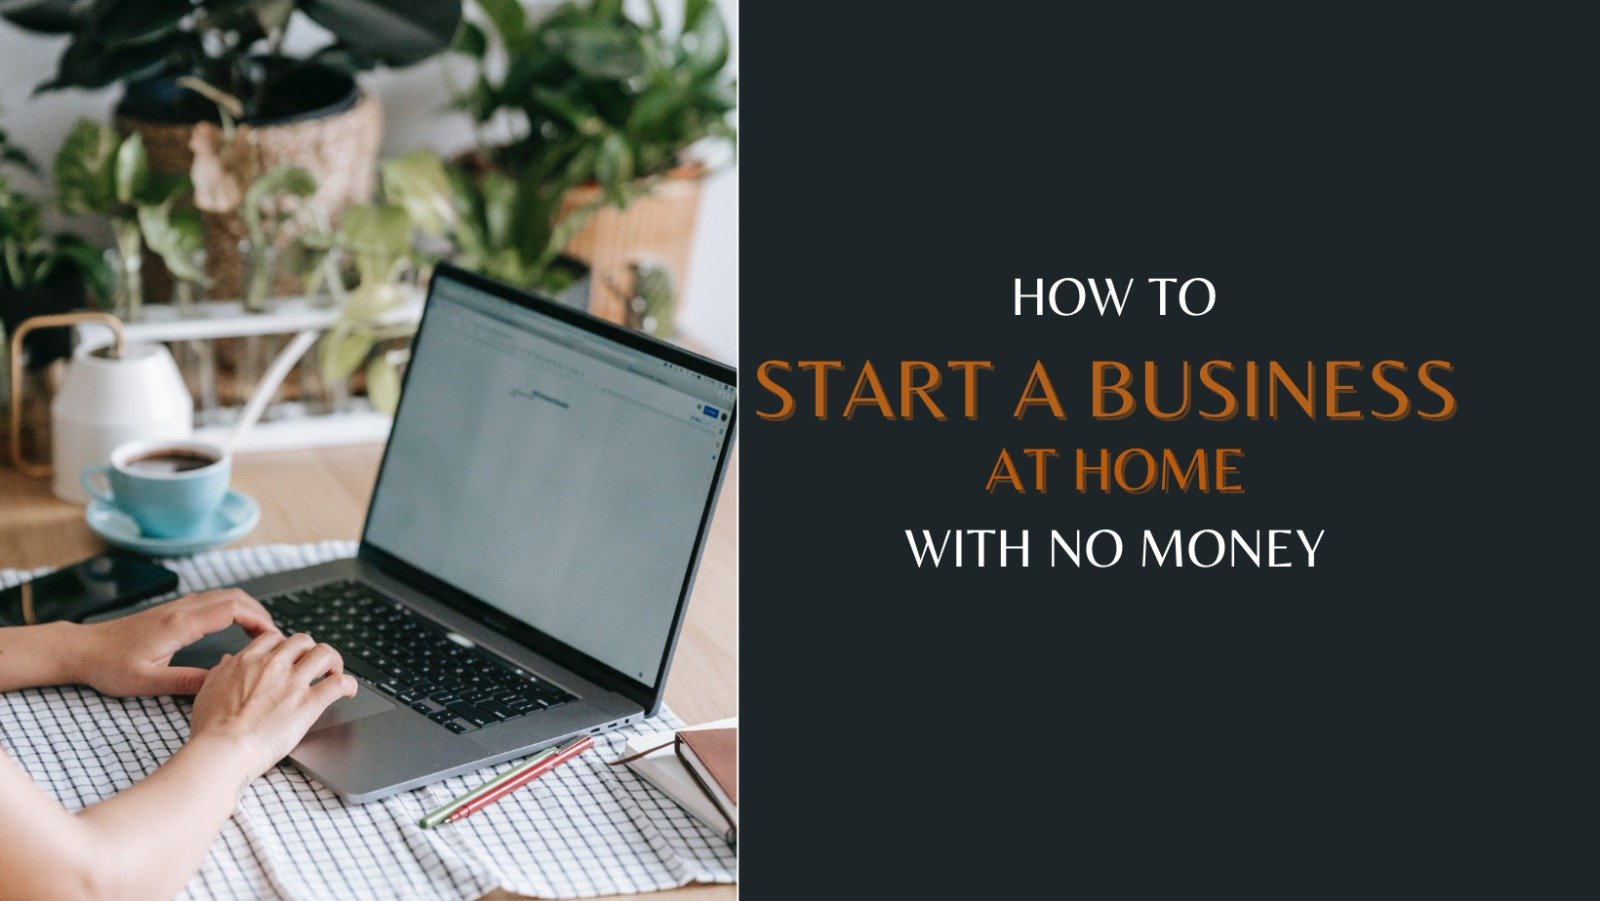 How To Start A Business At Home With No Money?